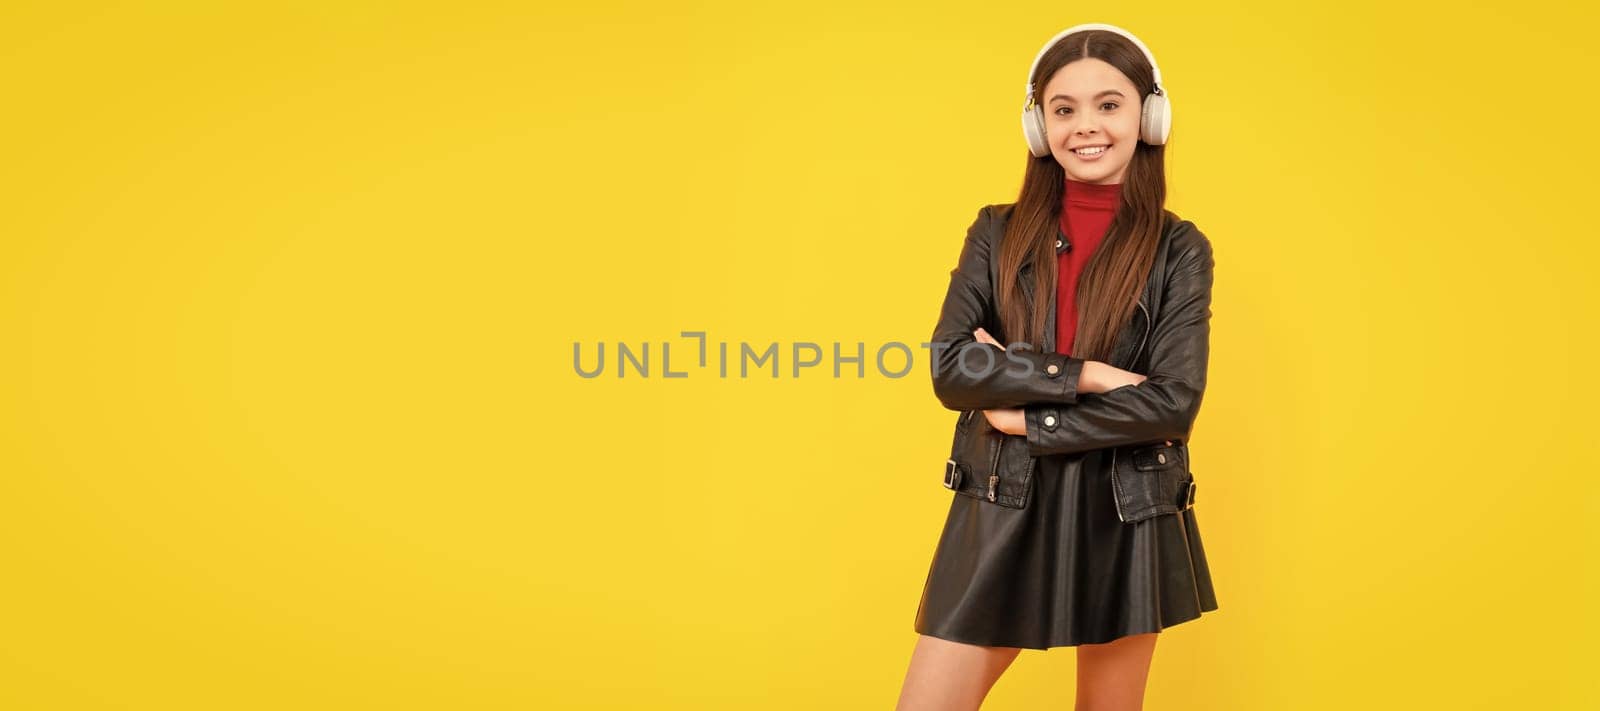 back to school. cheerful teen girl in headphones full length. music lover. Child portrait with headphones, horizontal poster. Girl listening to music, banner with copy space